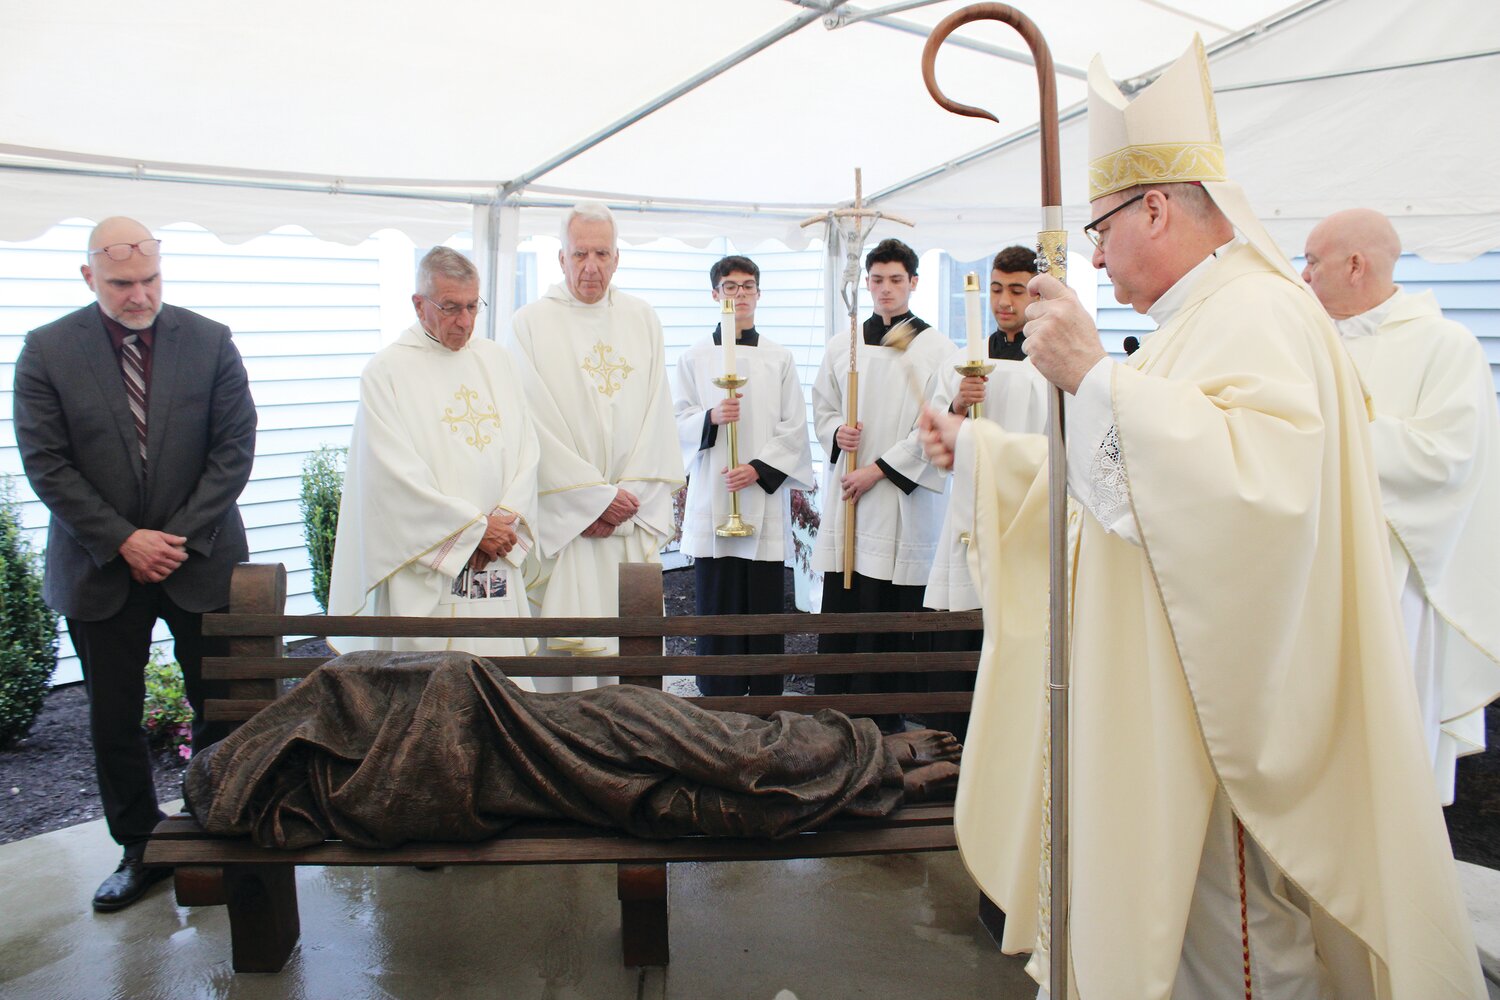 Bishop Richard G. Henning visits Holy Apostles Church in Cranston to celebrate Mass and to bless the new “Homeless Jesus” sculpture by Timothy Schmalz, at left. Inspired by Matthew 25, the sculpture suggests Christ is with the most marginalized in society. The figure is shrouded in a blanket with the only indication that it is Jesus being the visible wounds on the feet.